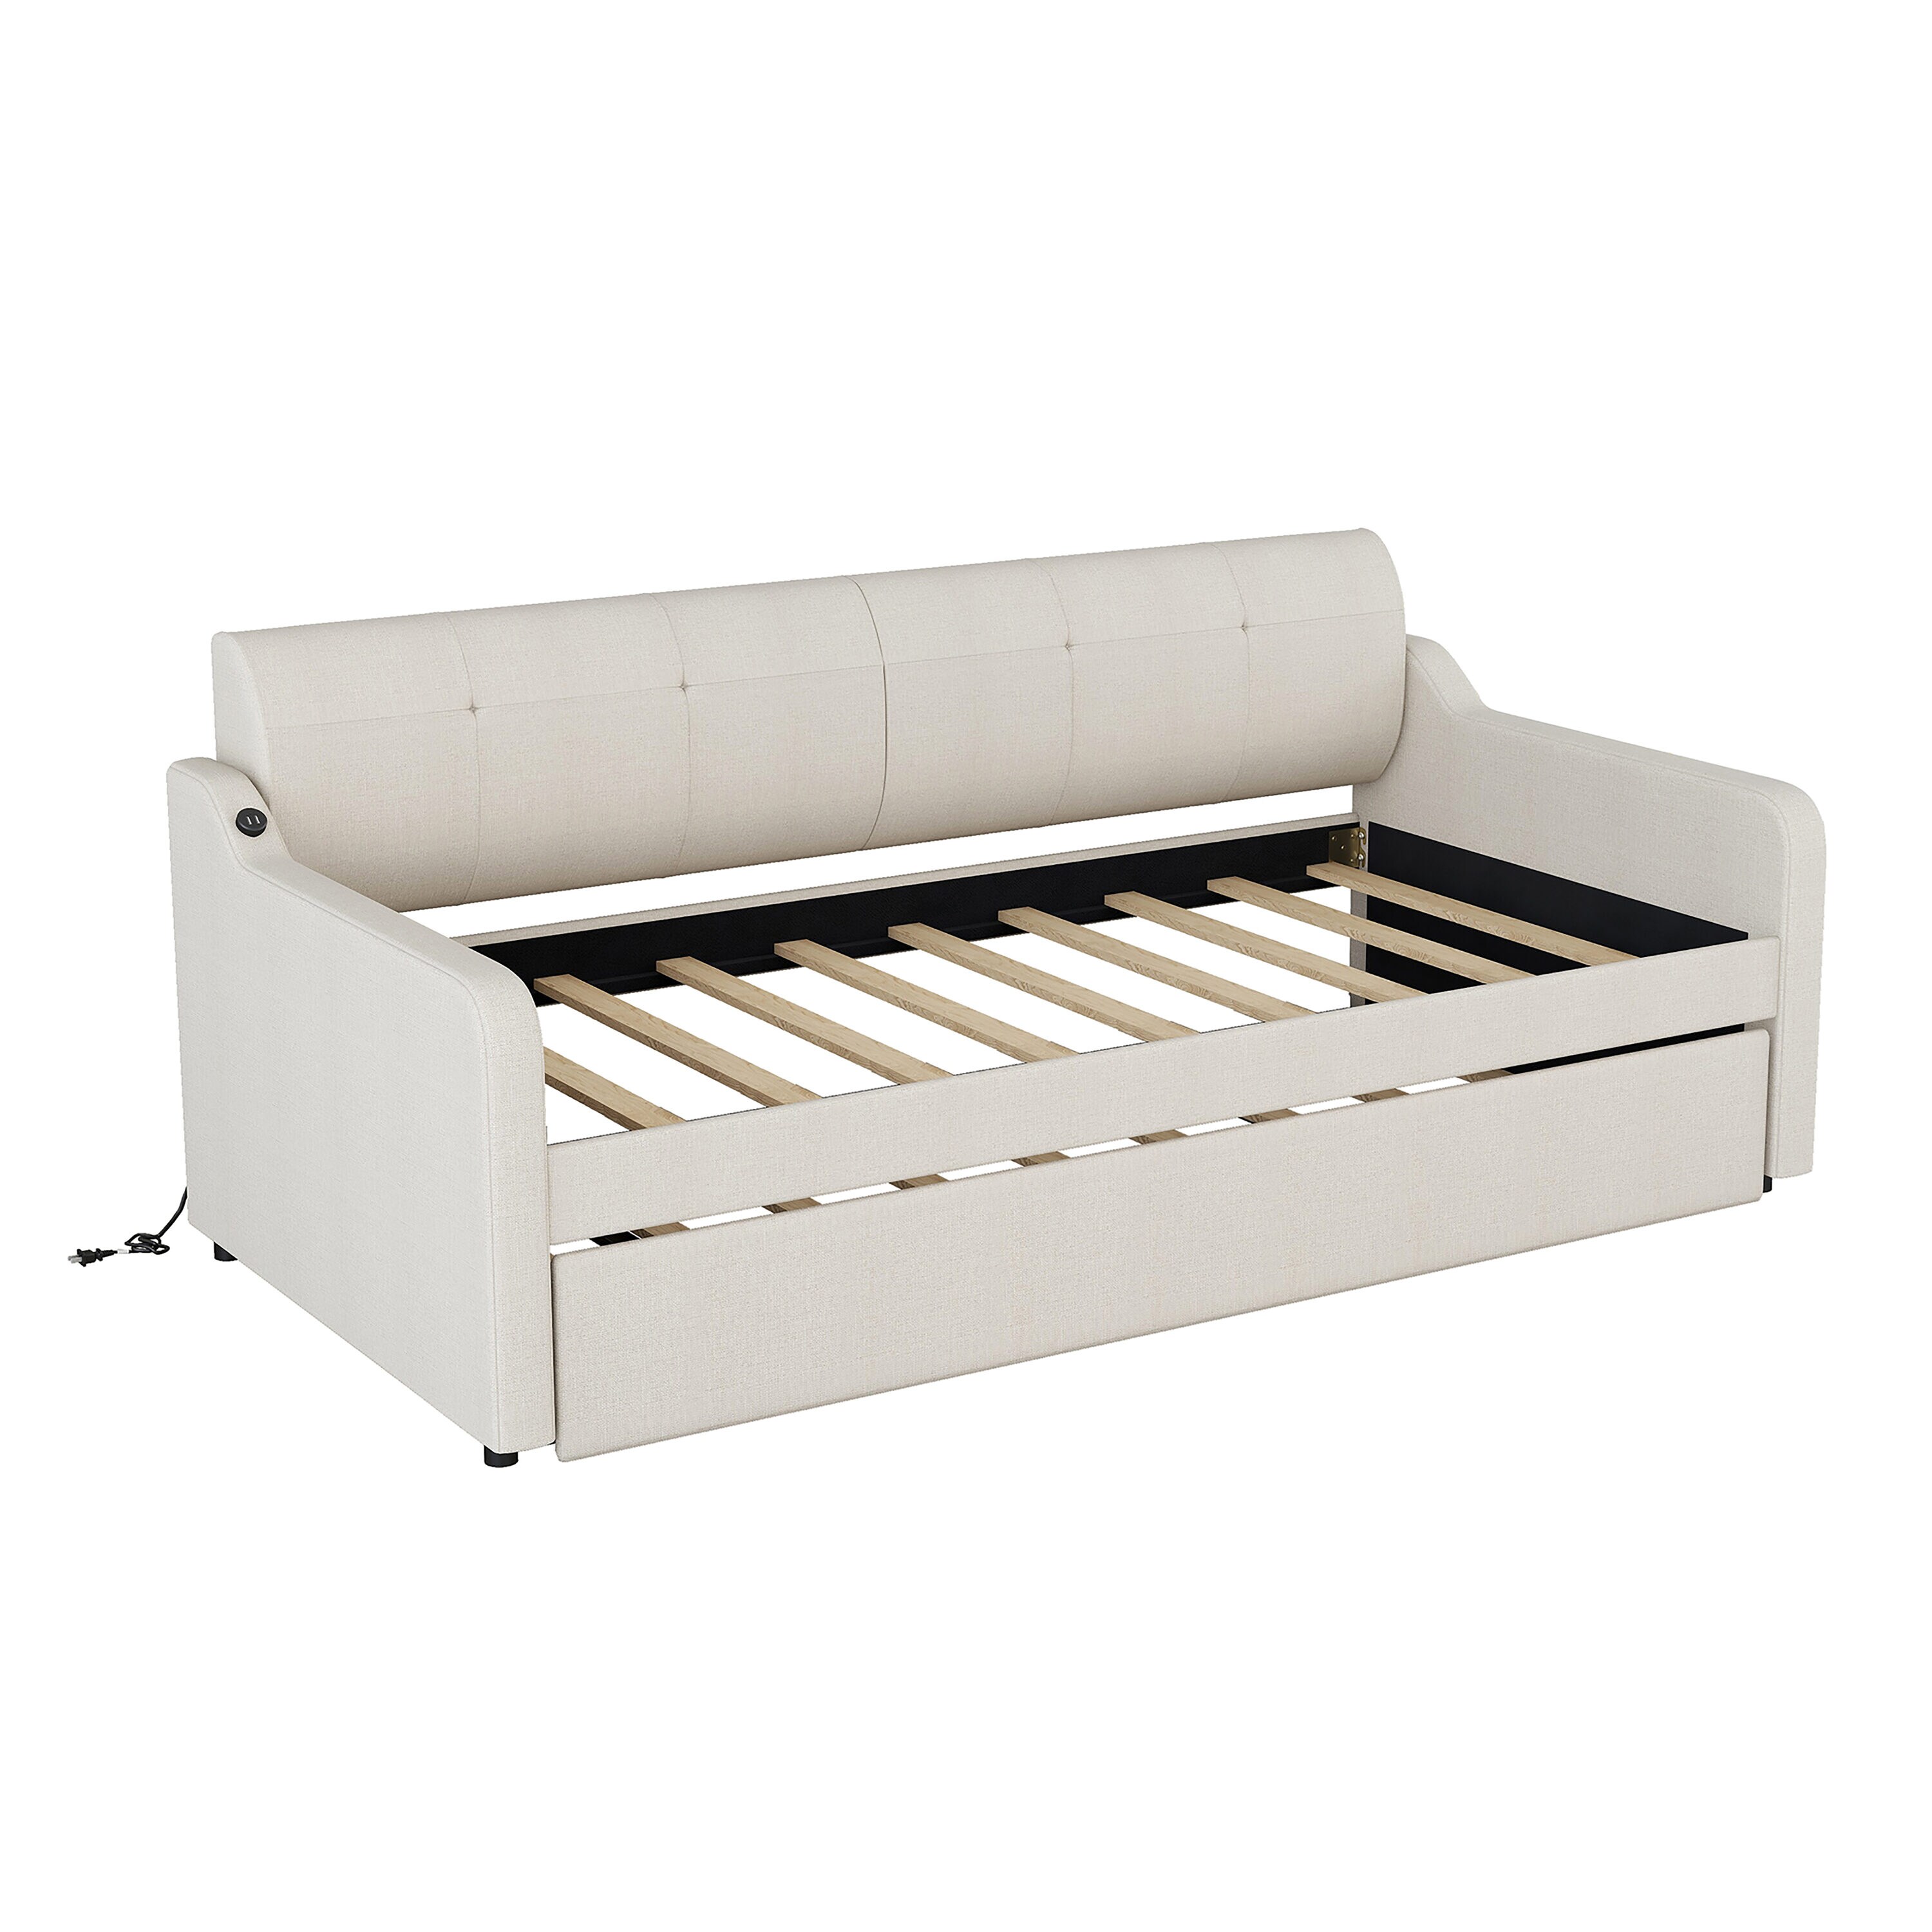 ModernLuxe Beige Contemporary/Modern Sofa Bed in the Futons & Sofa Beds ...